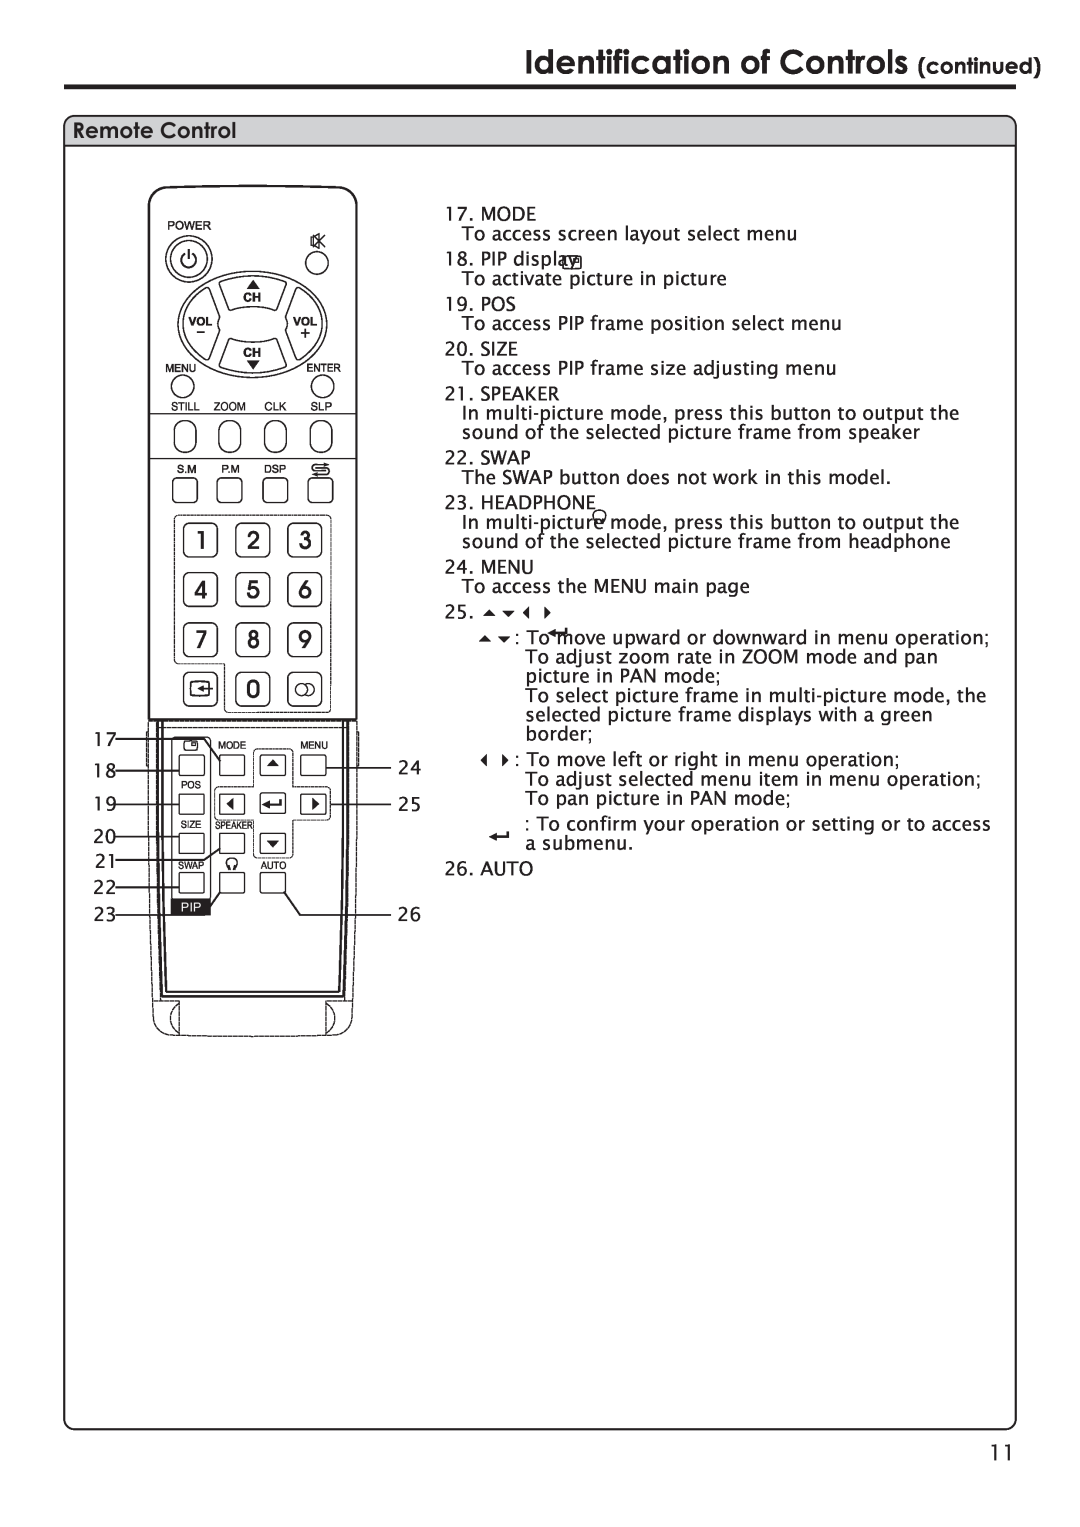 Primate Systems PDP TV manual Identification of Controls continued, Remote Control 